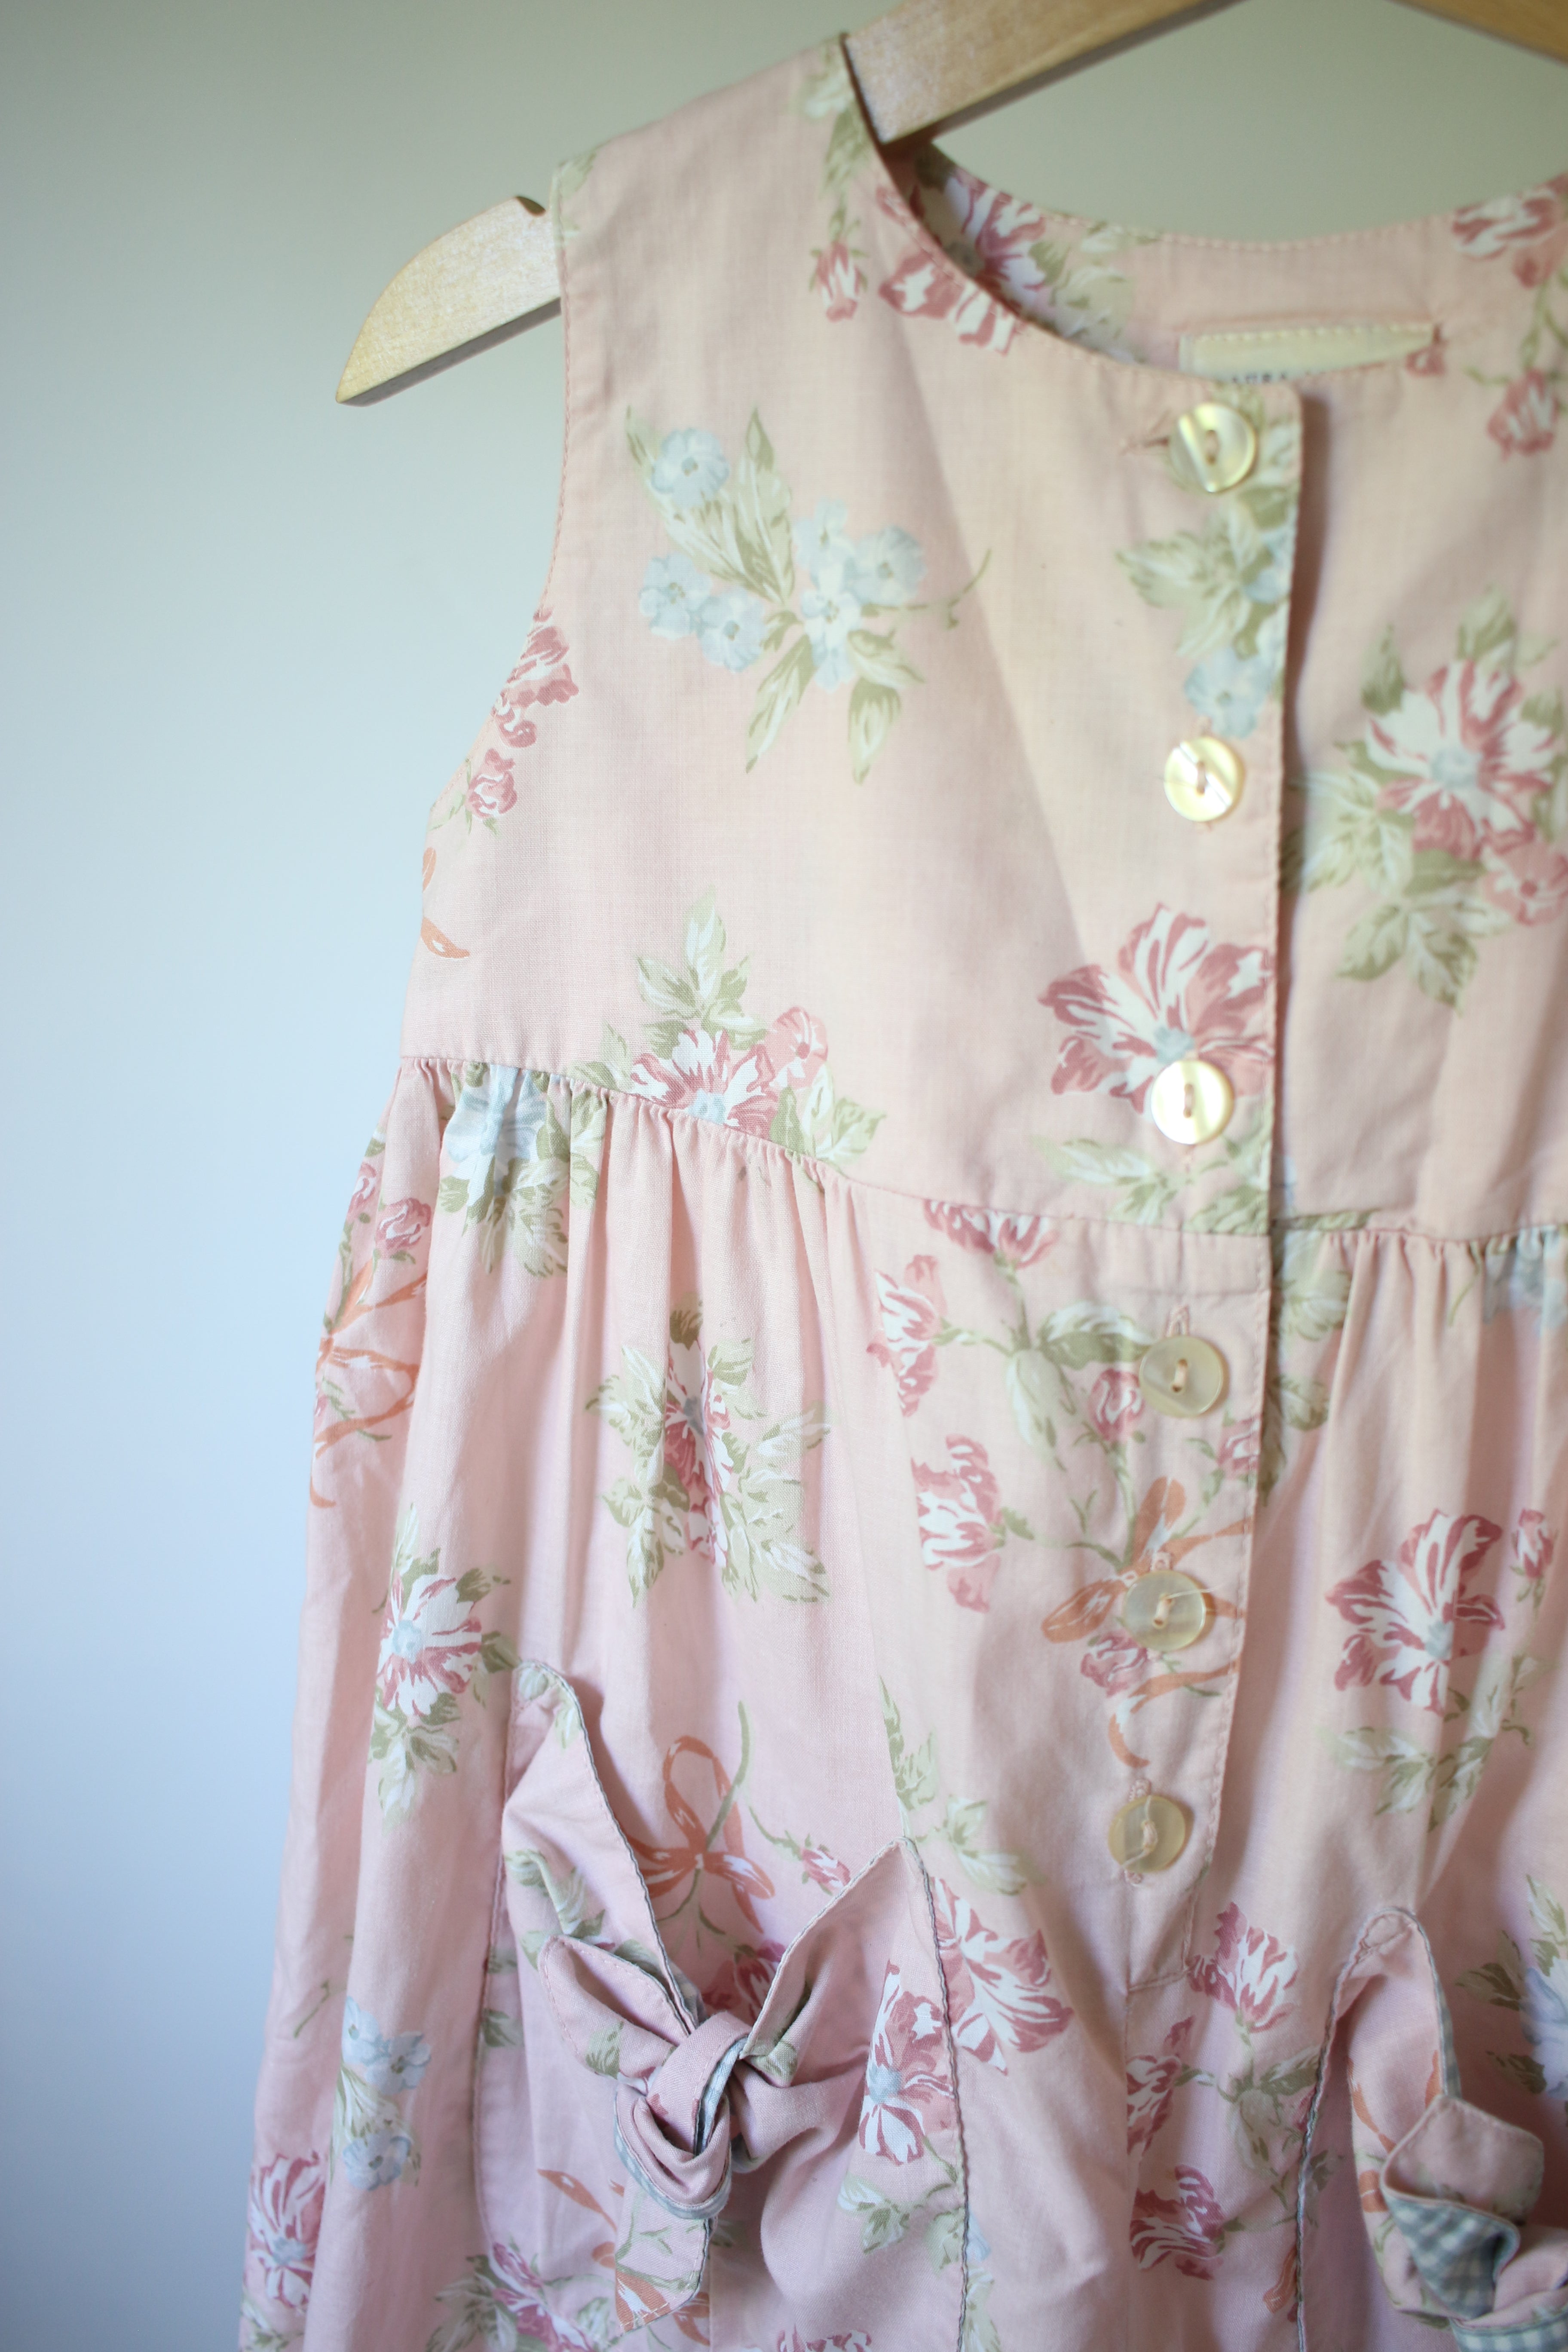 Vintage Laura Ashley floral jumpsuit - size 3 years - made in UK